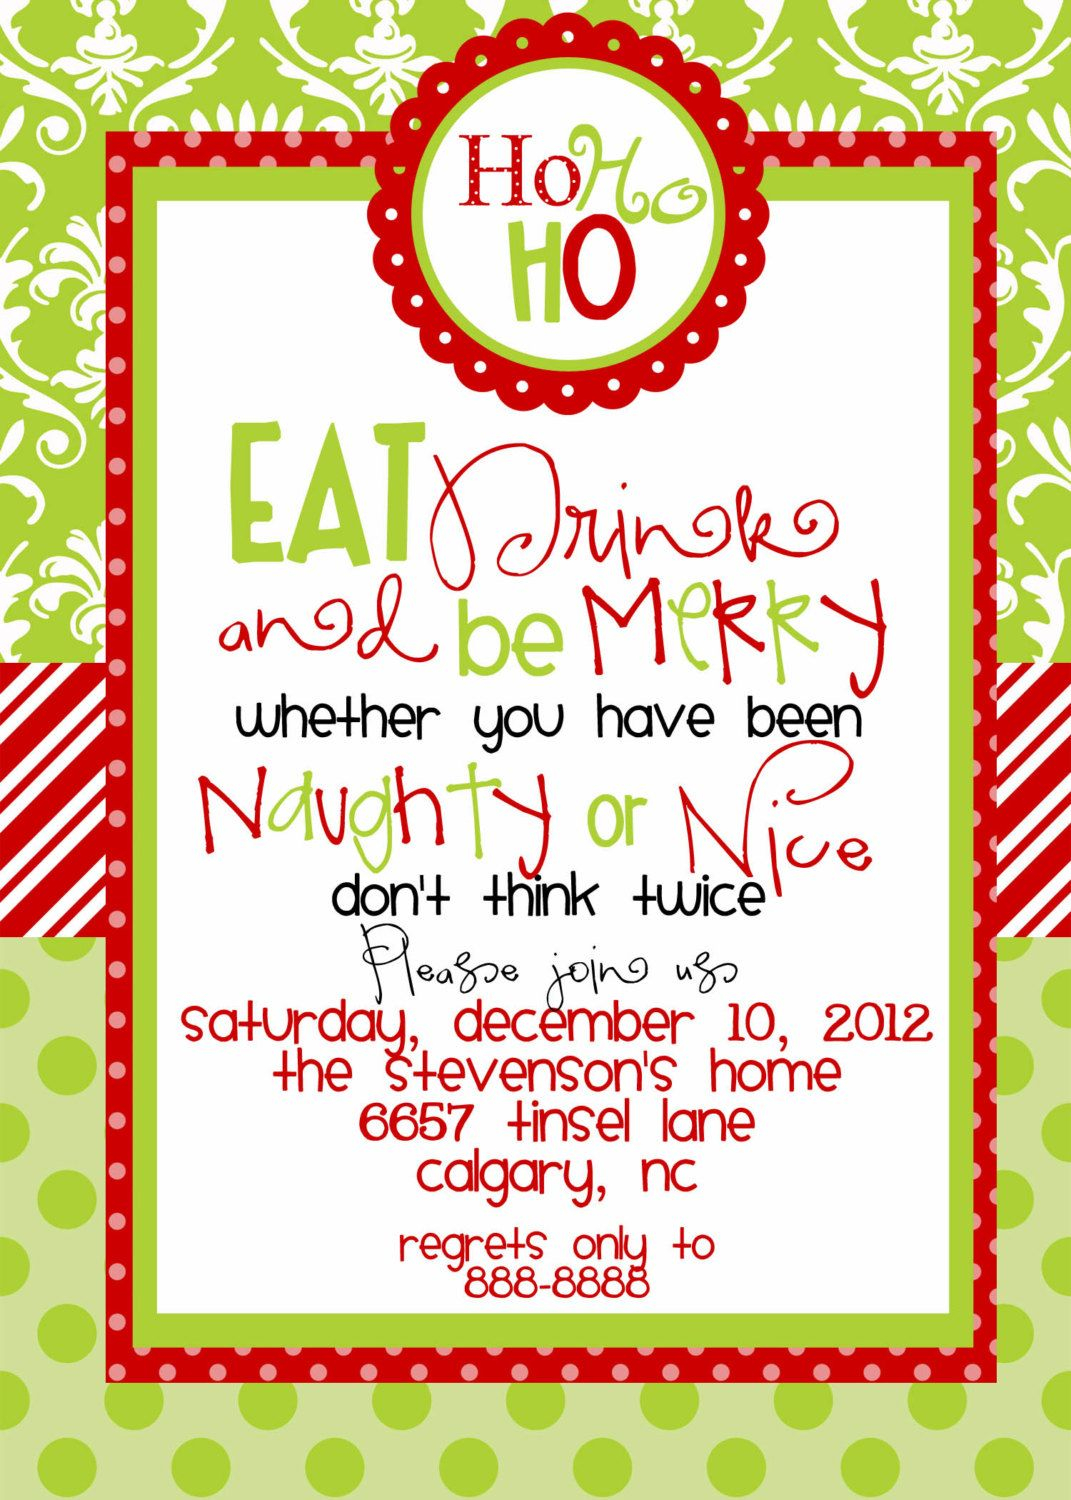 Custom Designed Christmas Party Invitations Eat Drink And Be Merry inside dimensions 1071 X 1500